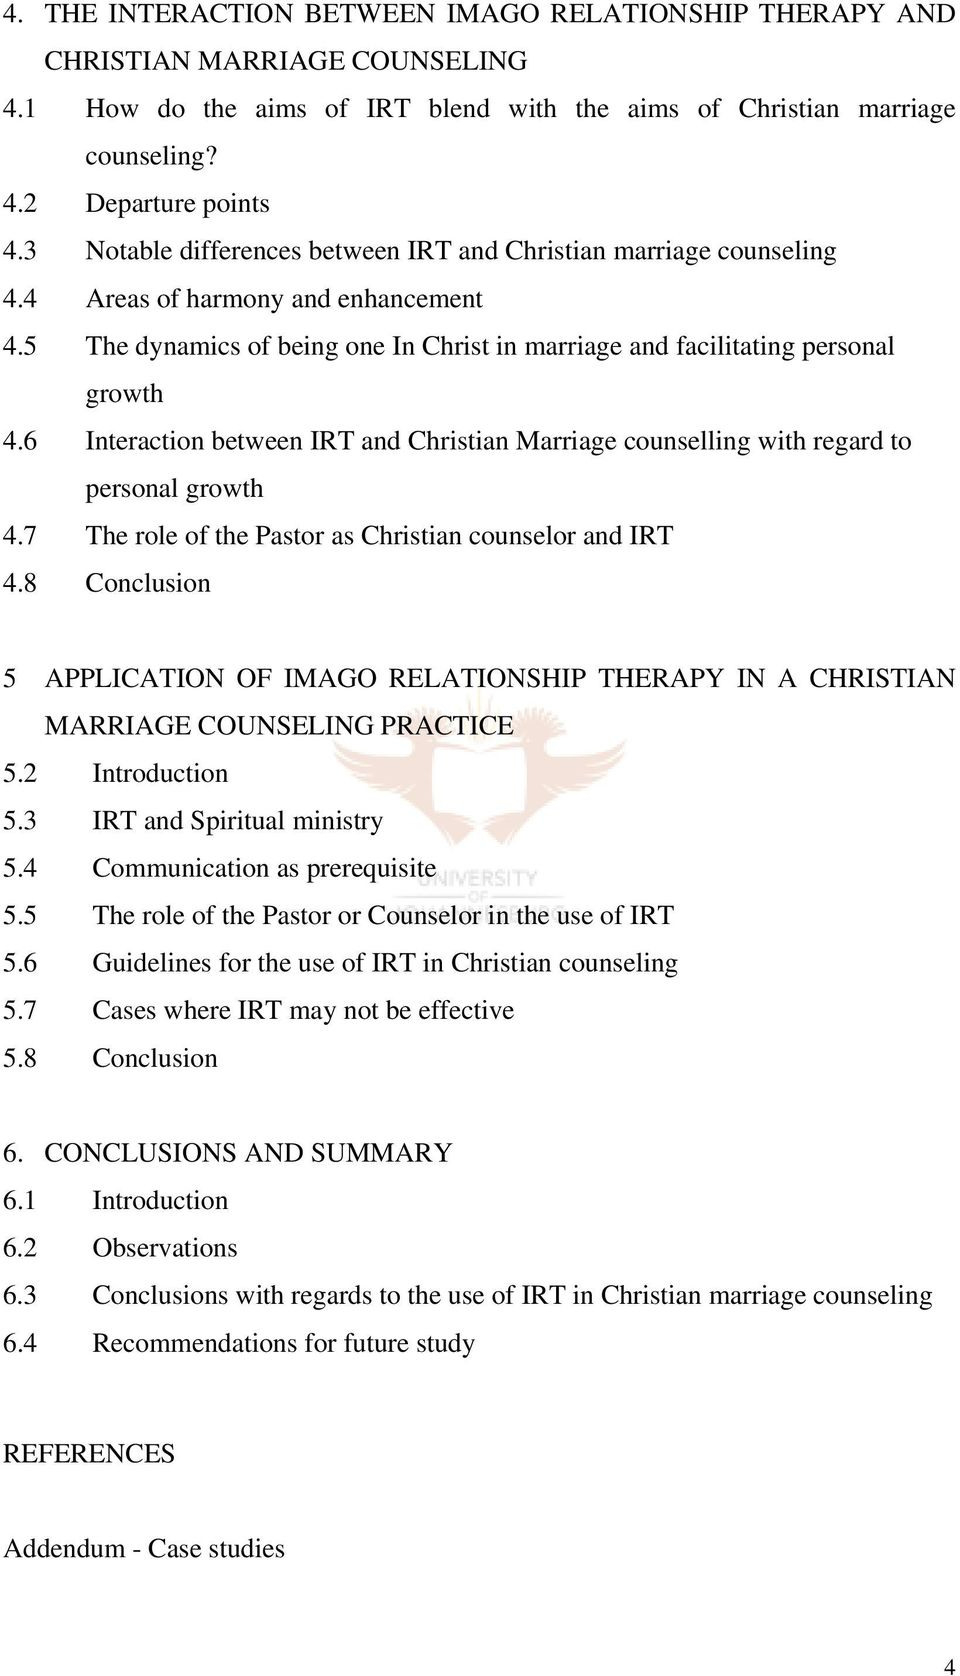 Imago Relationship Therapy And Christian Marriage Counseling  Pdf